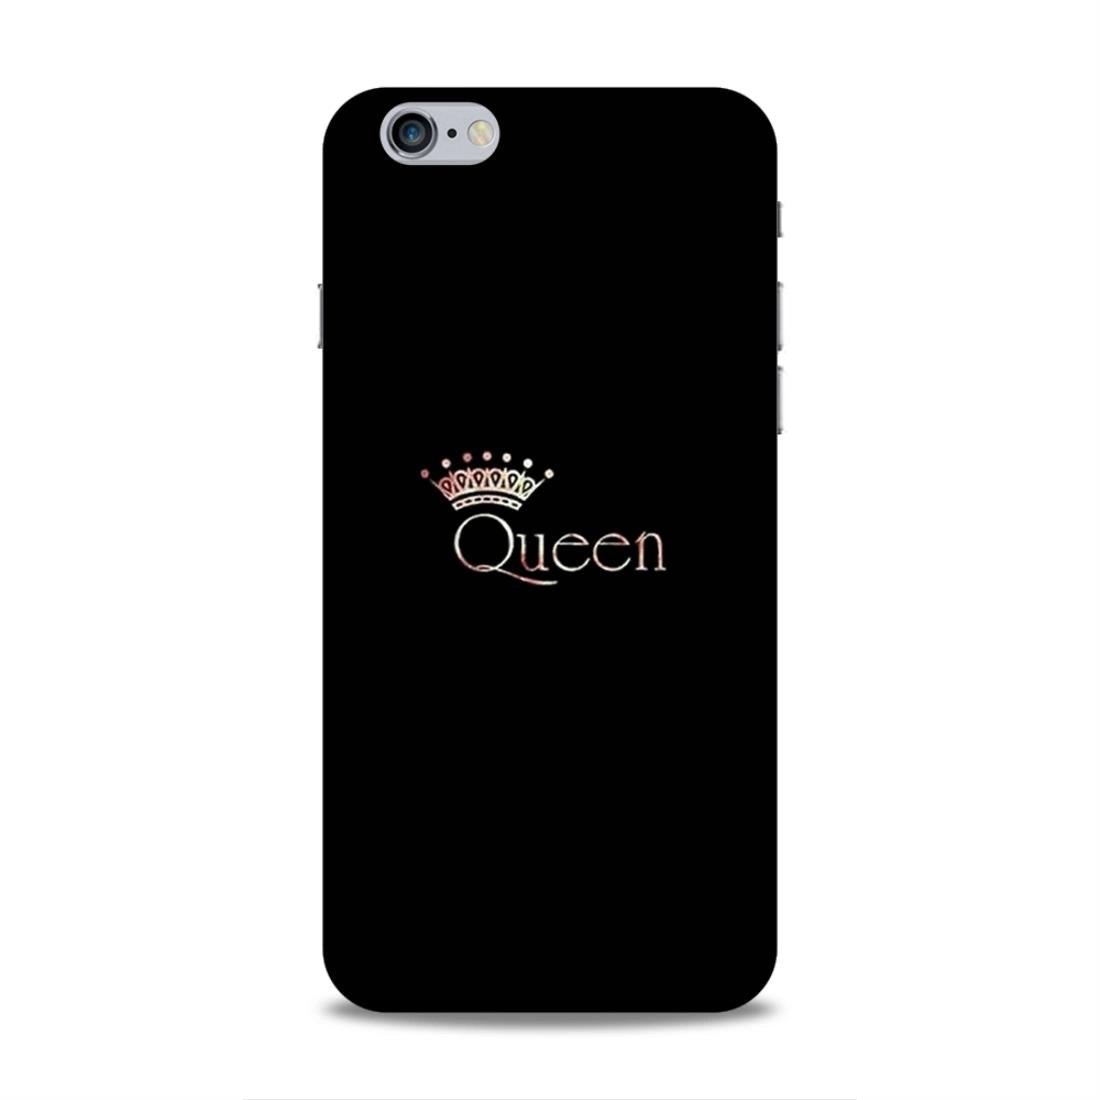 Right Marc Queen Hard Back Case For Apple iPhone 6 Plus / 6s Plus Apple Apple iPhone 6 Plus / 6s Plus Mobile Case